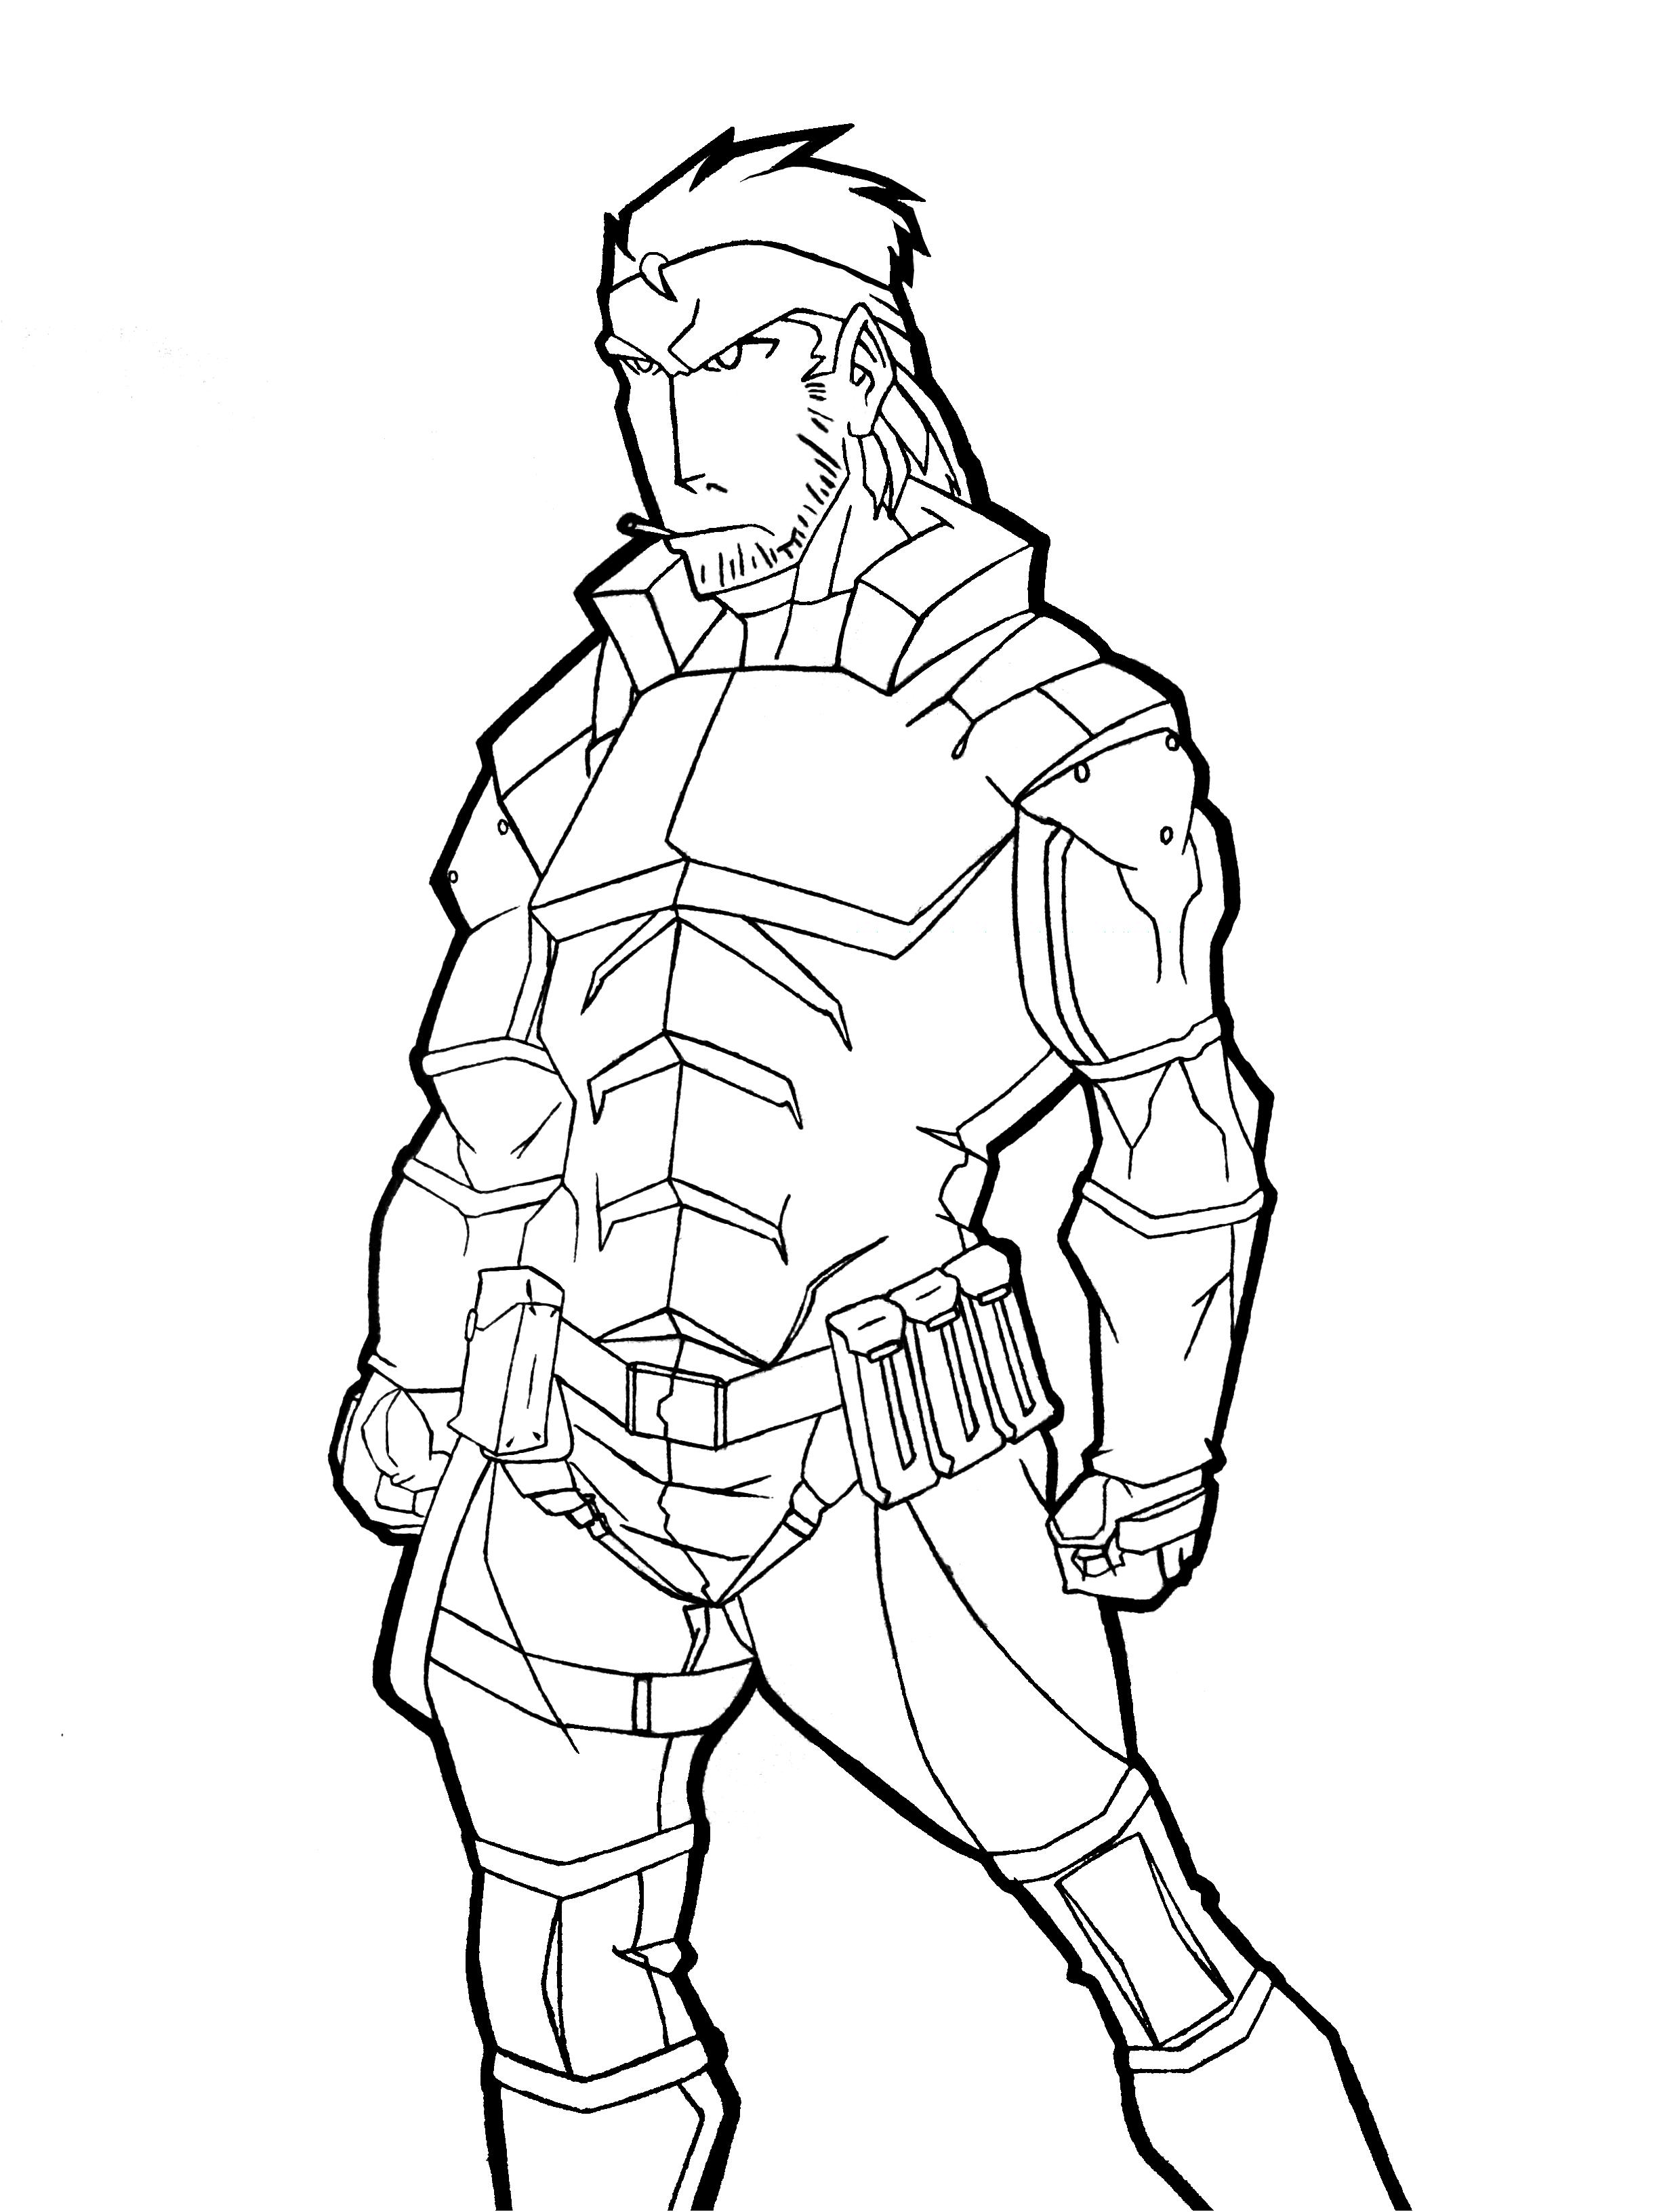 Solid Snake - LineArt by EckoSlime on Clipart library